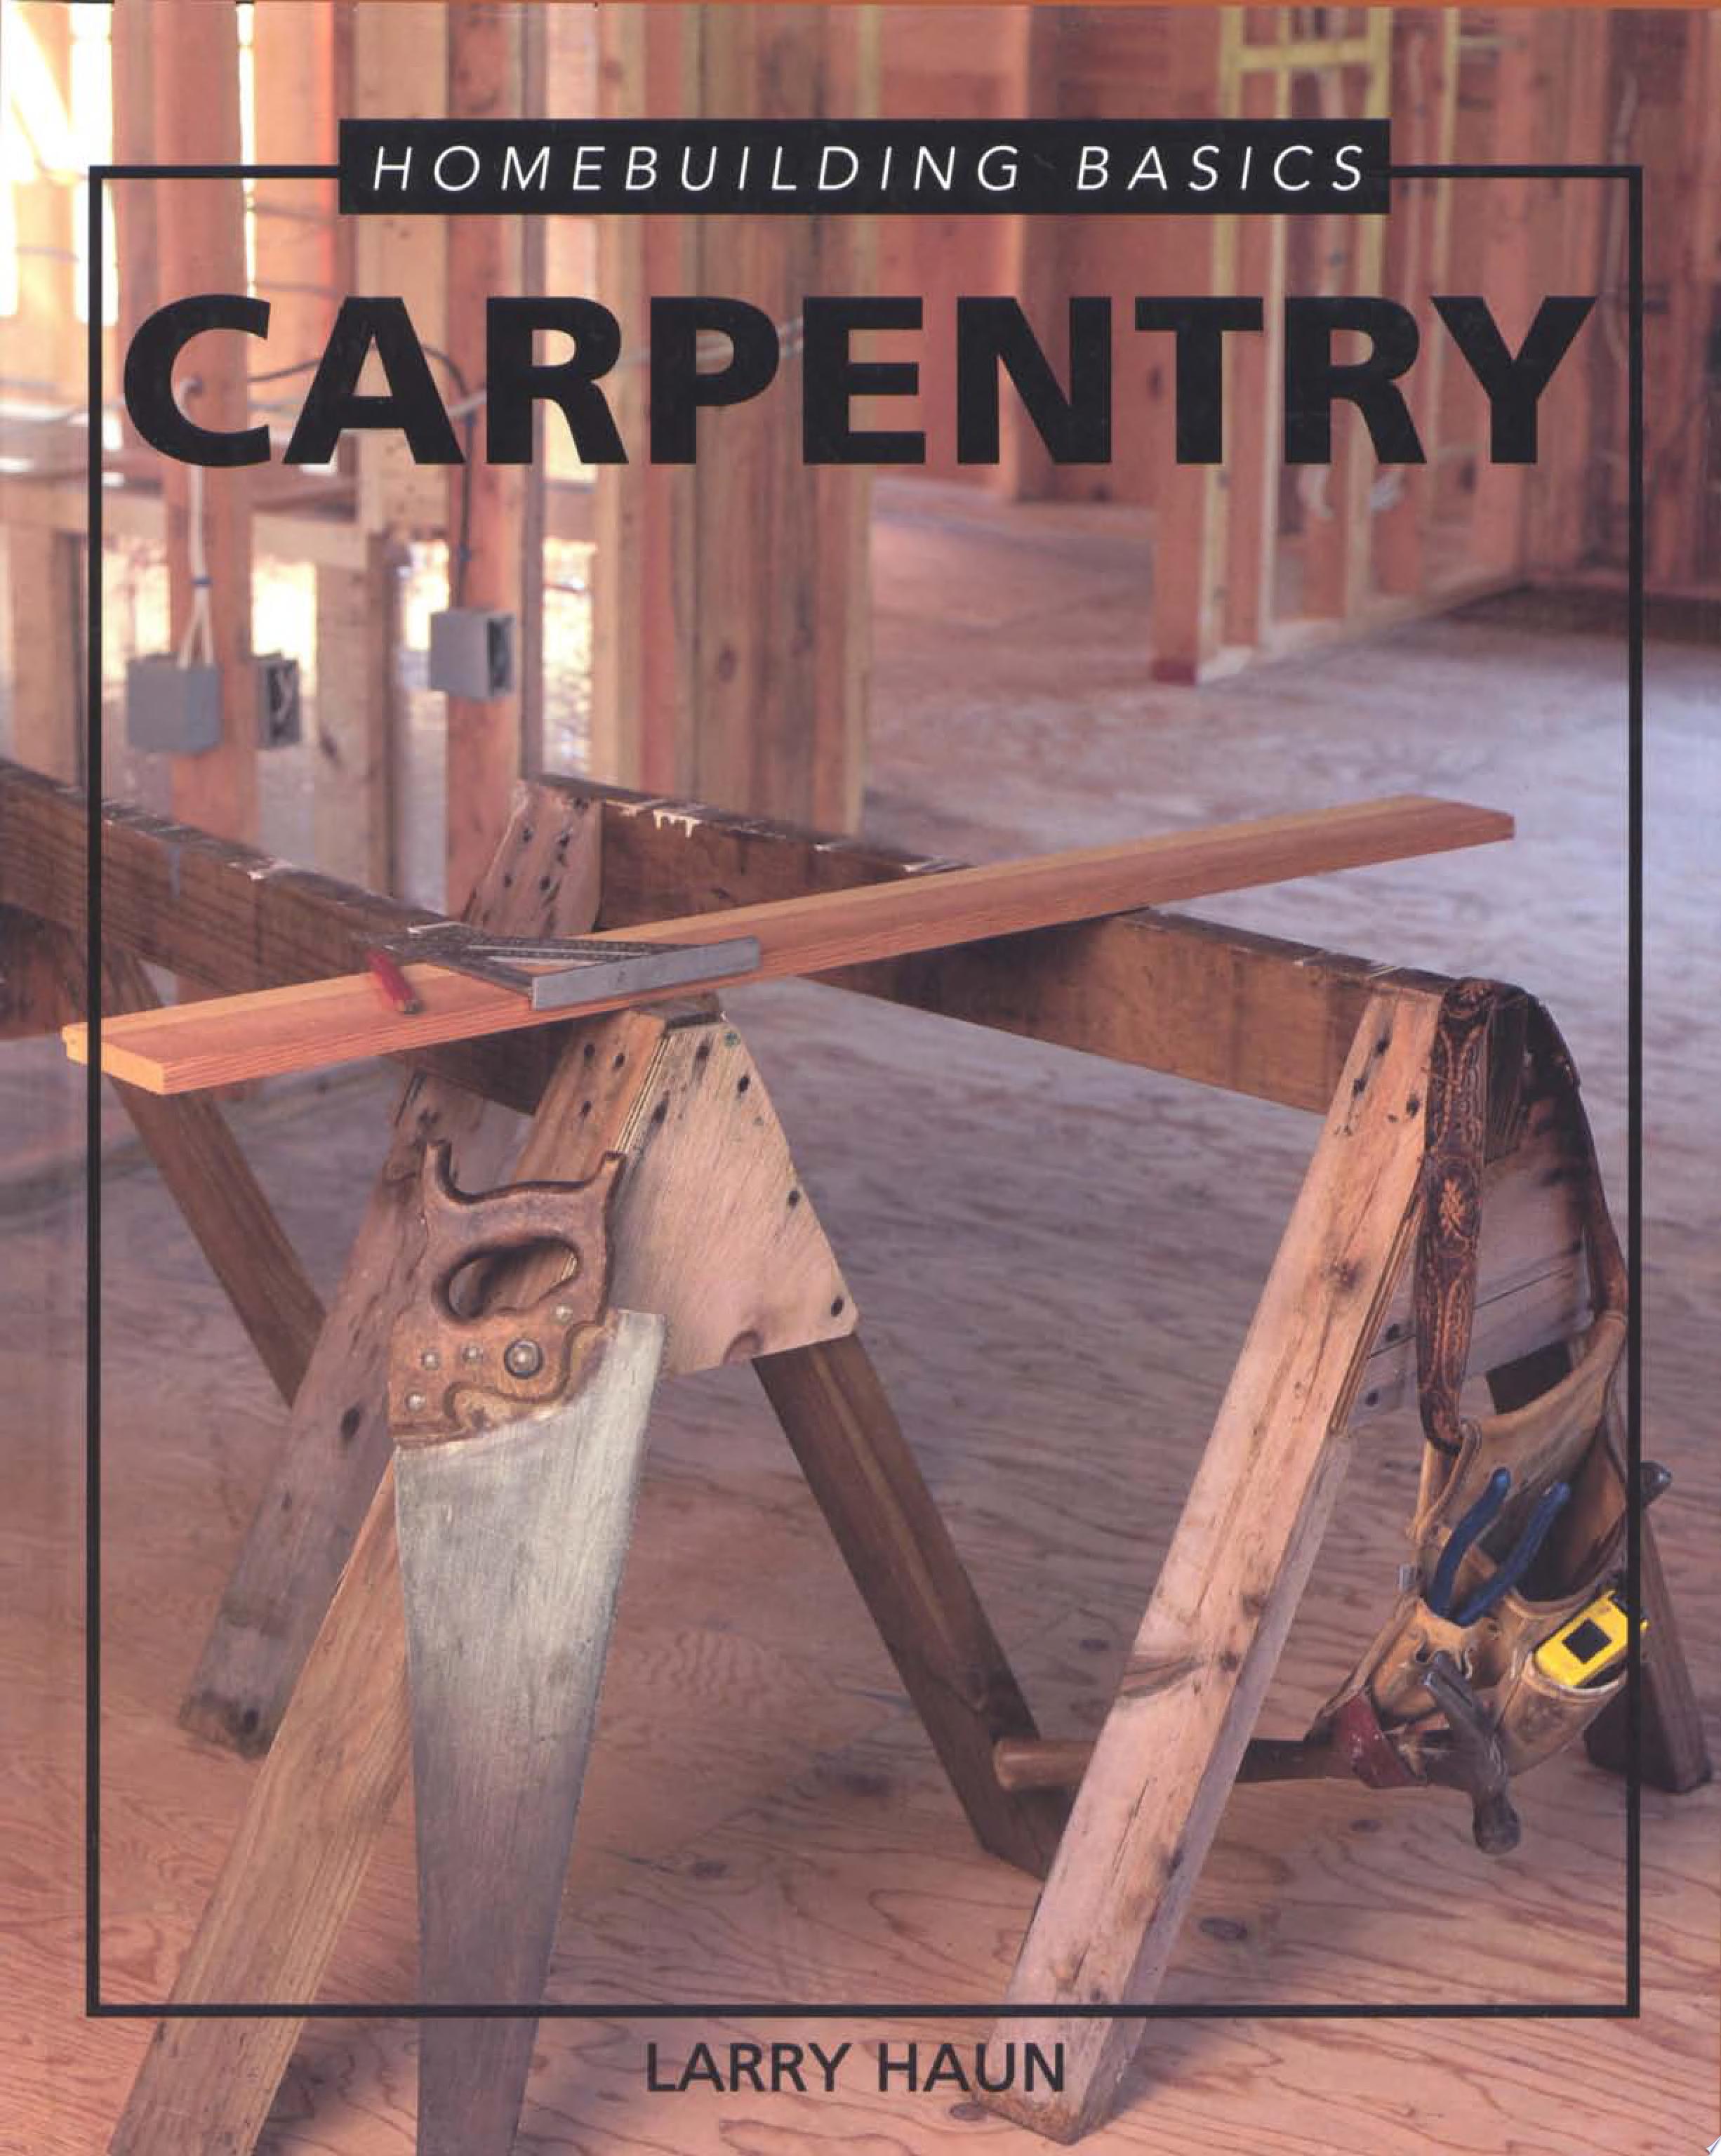 Image for "Carpentry"